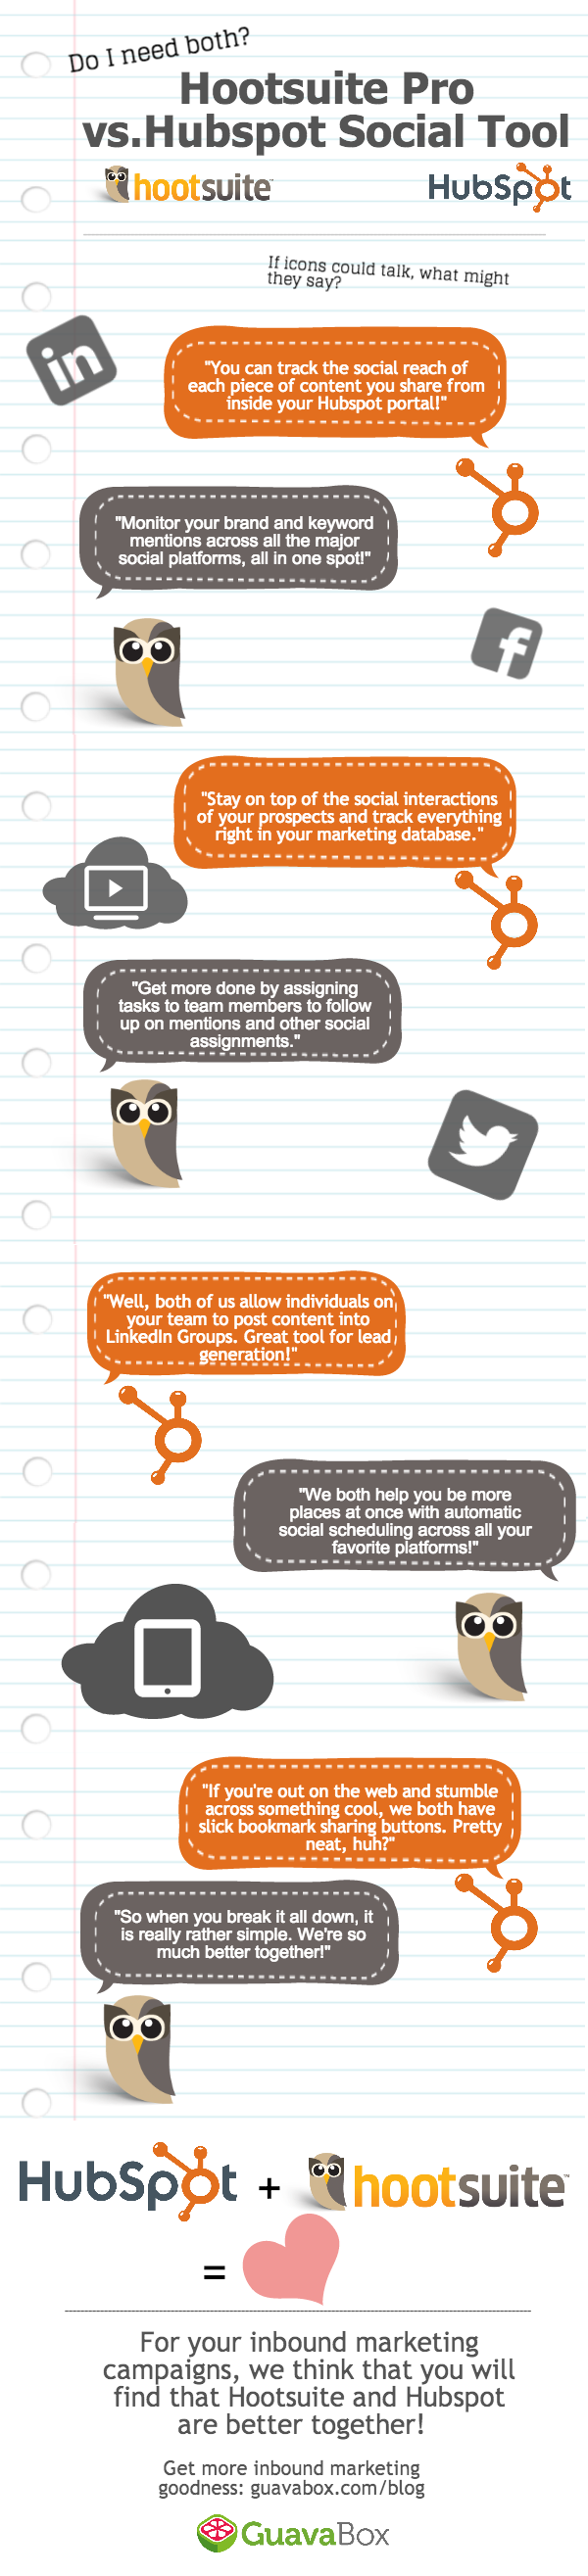 Social Media Marketing with Hootsuite and Hubspot